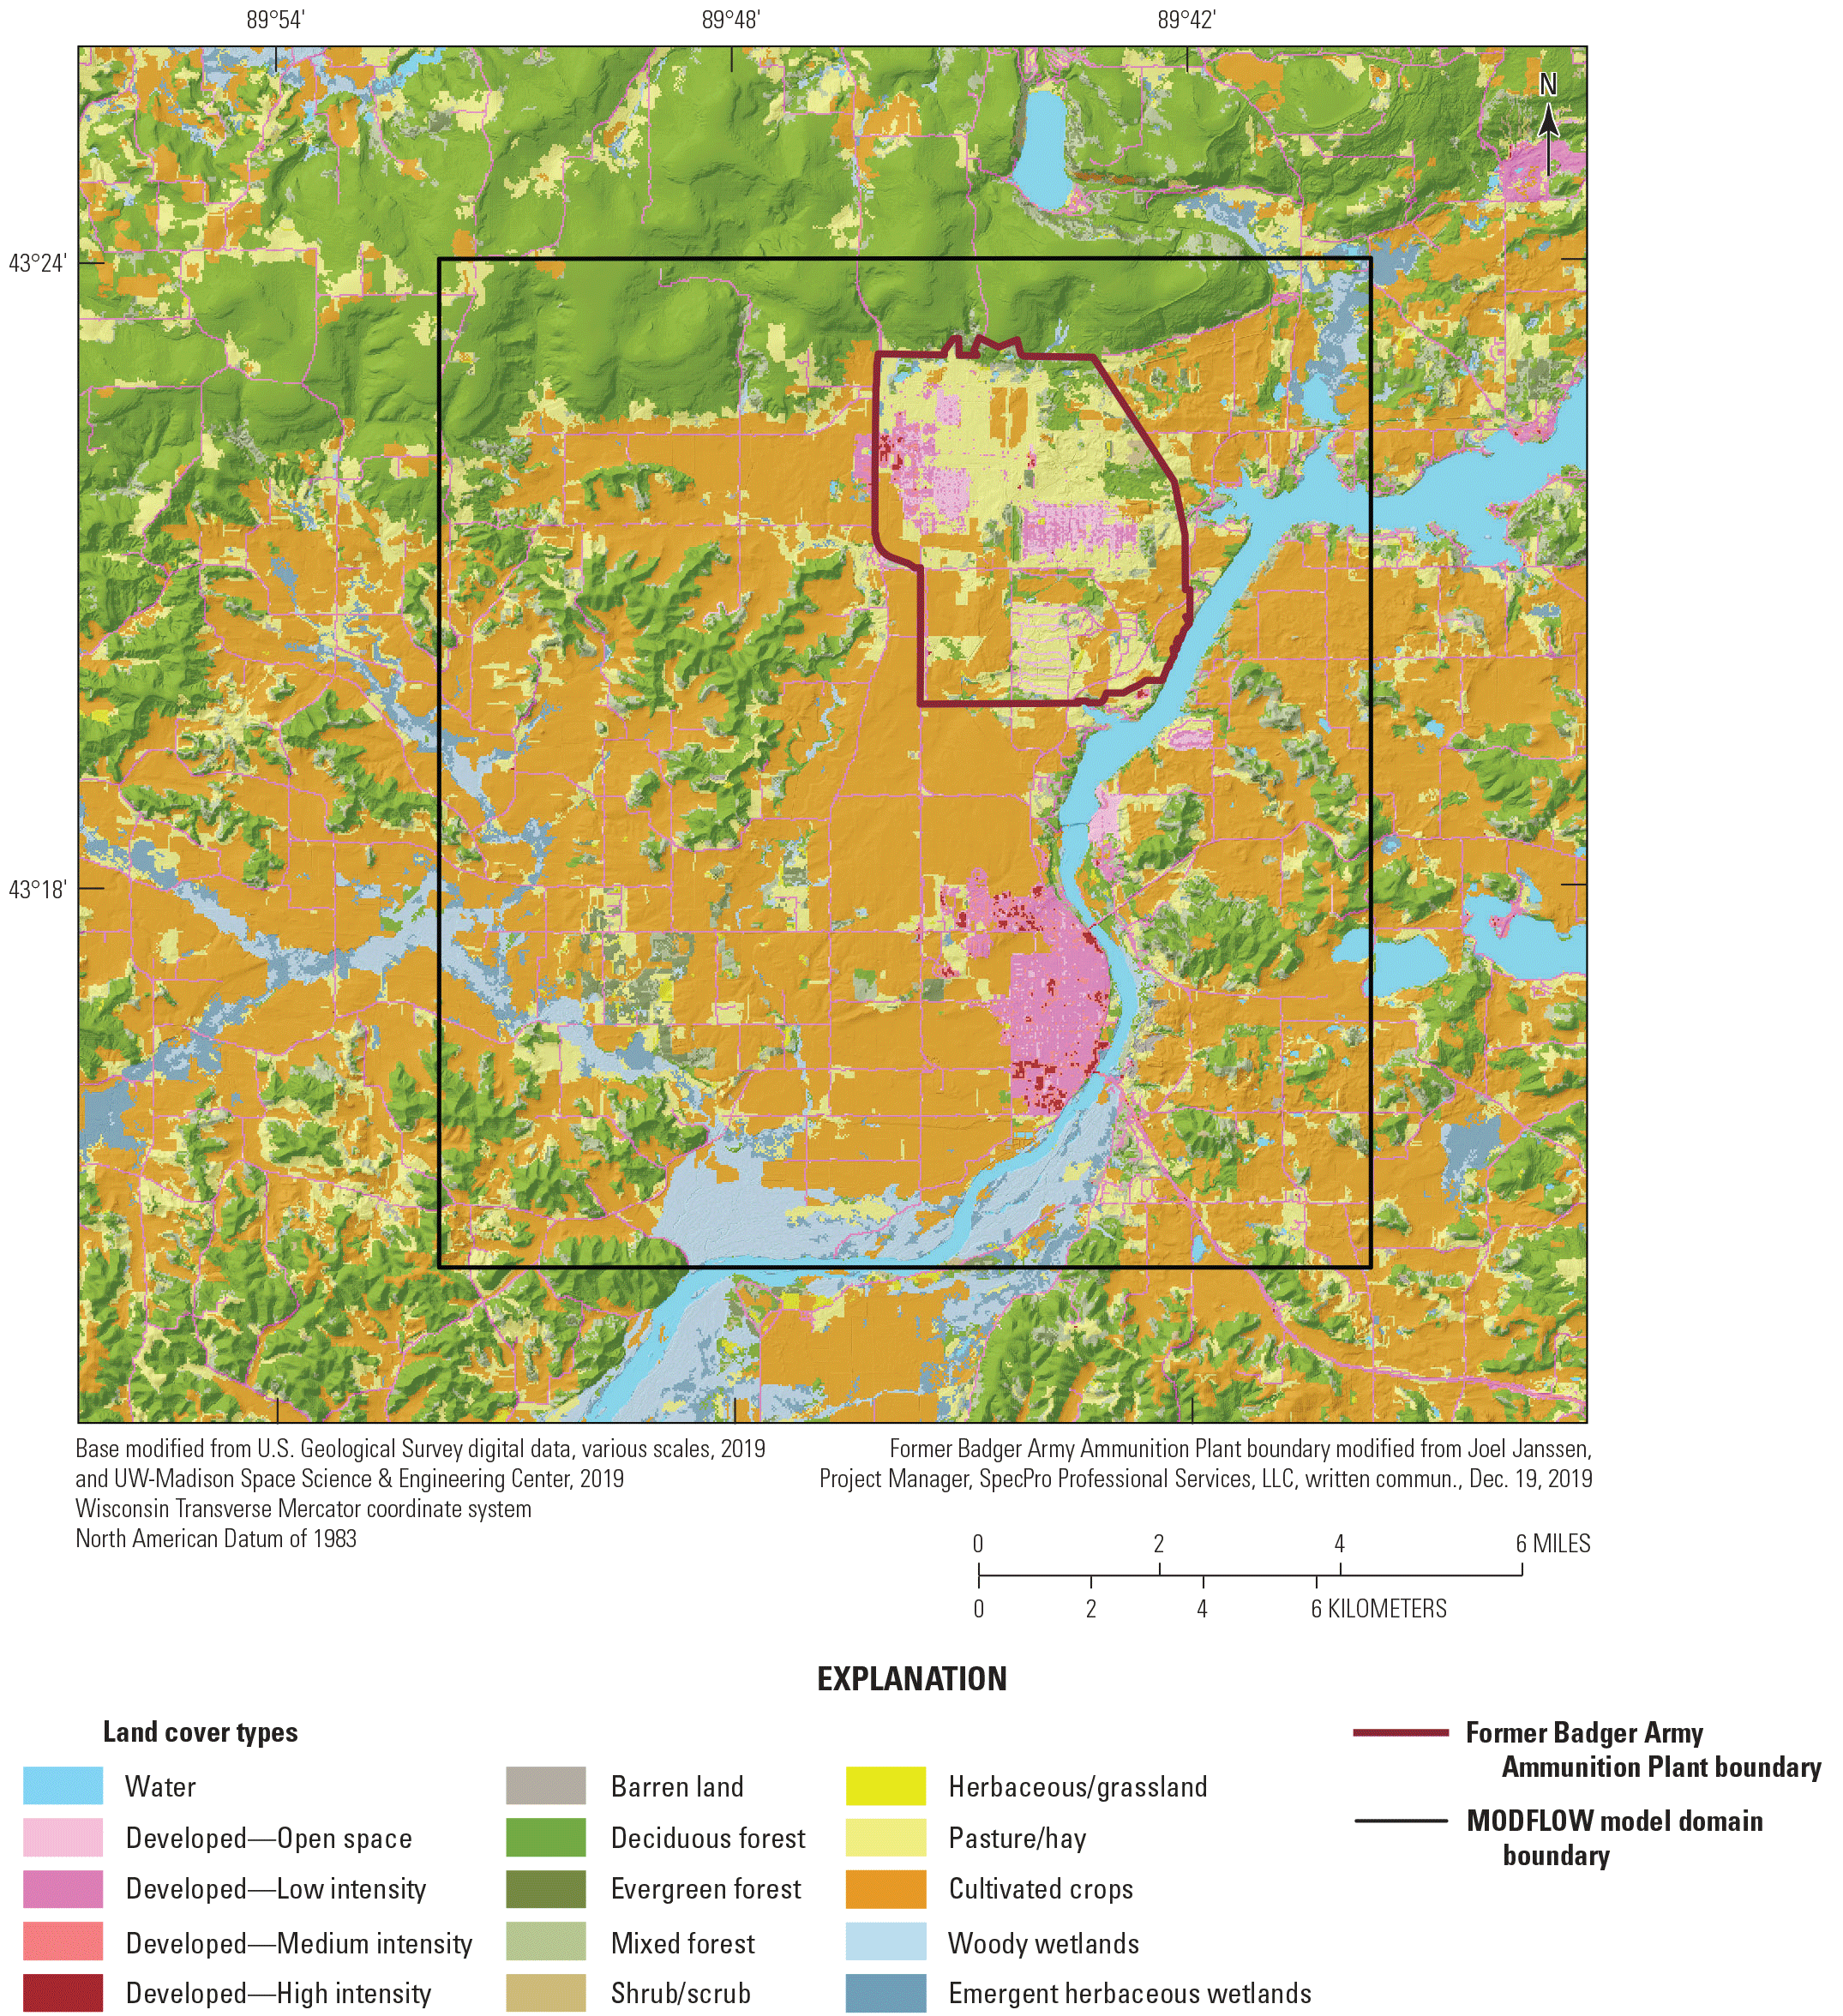 Land use in 2000 was mostly cultivated crops with forest covering topographic highs.
                  The former BAAP had a mix of pasture/hay and developed spaces.